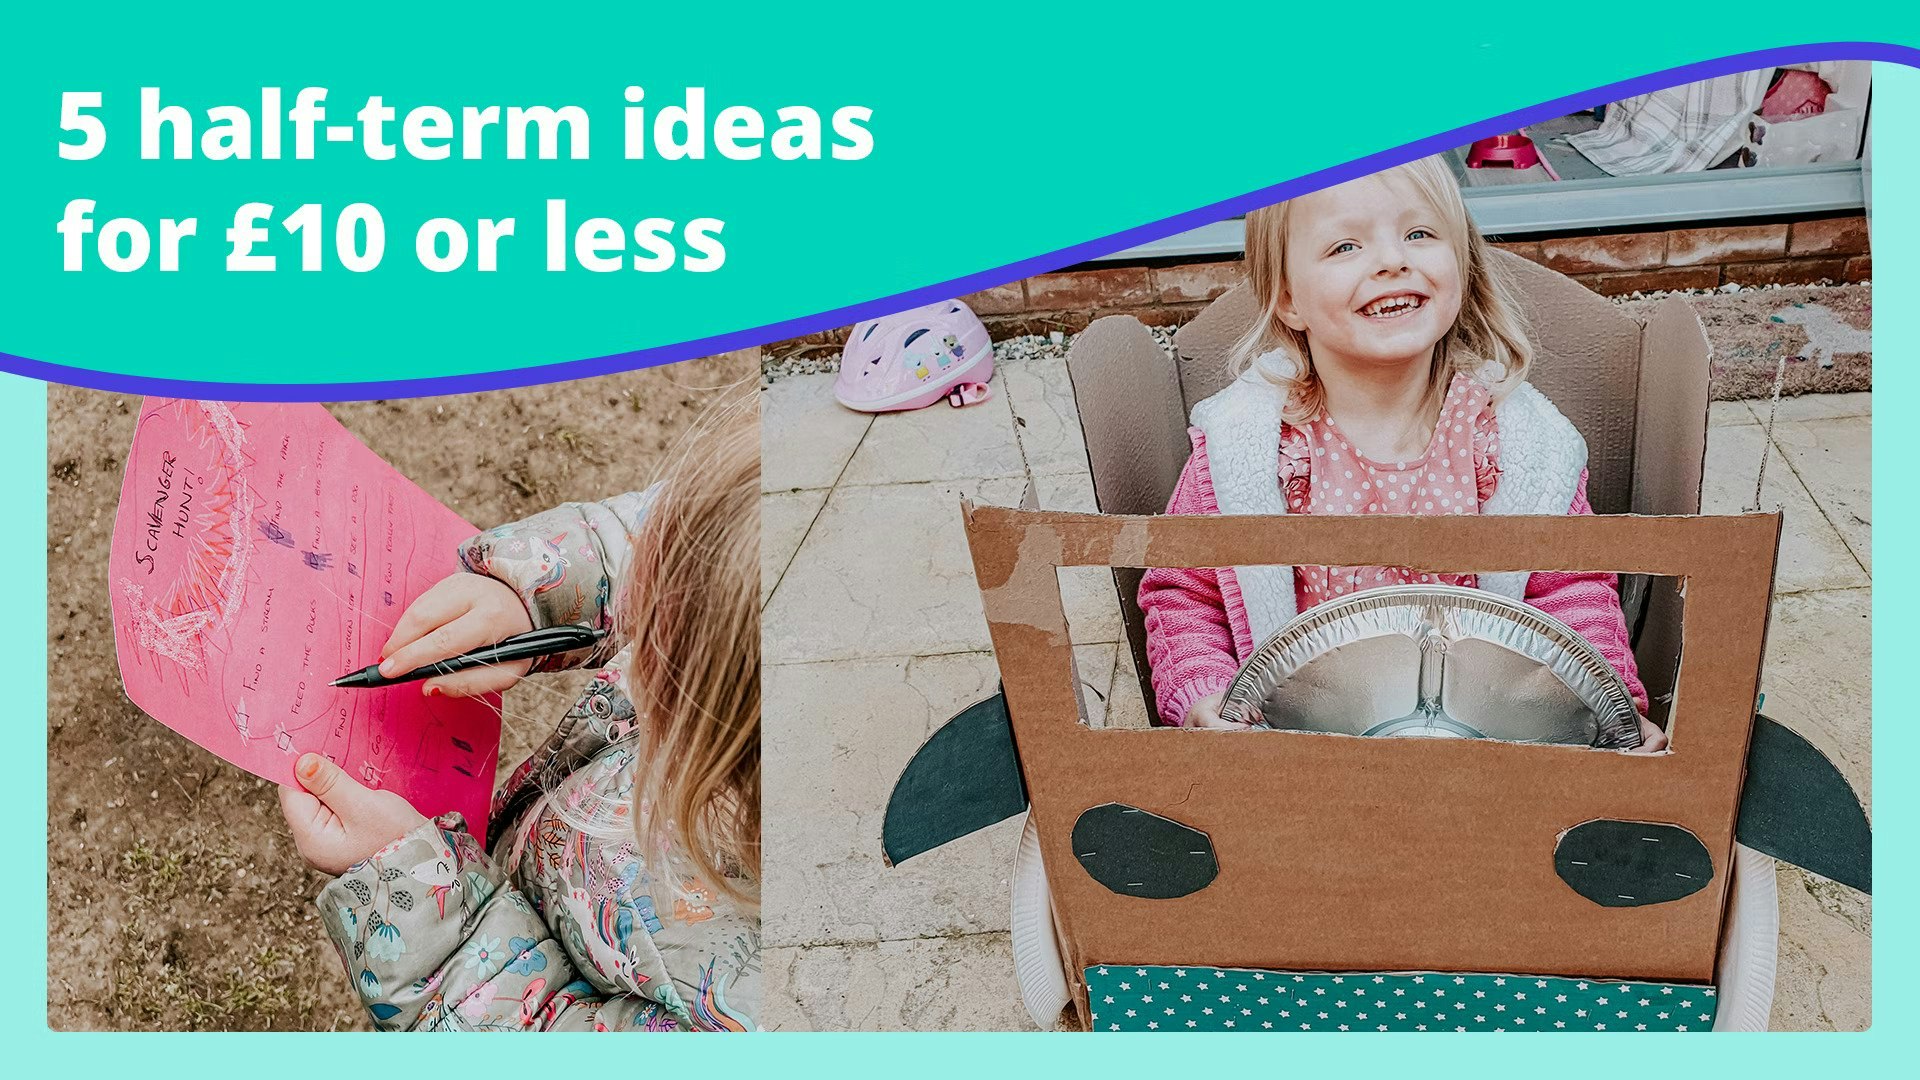 Featured image for 5 half-term ideas for £10 or less